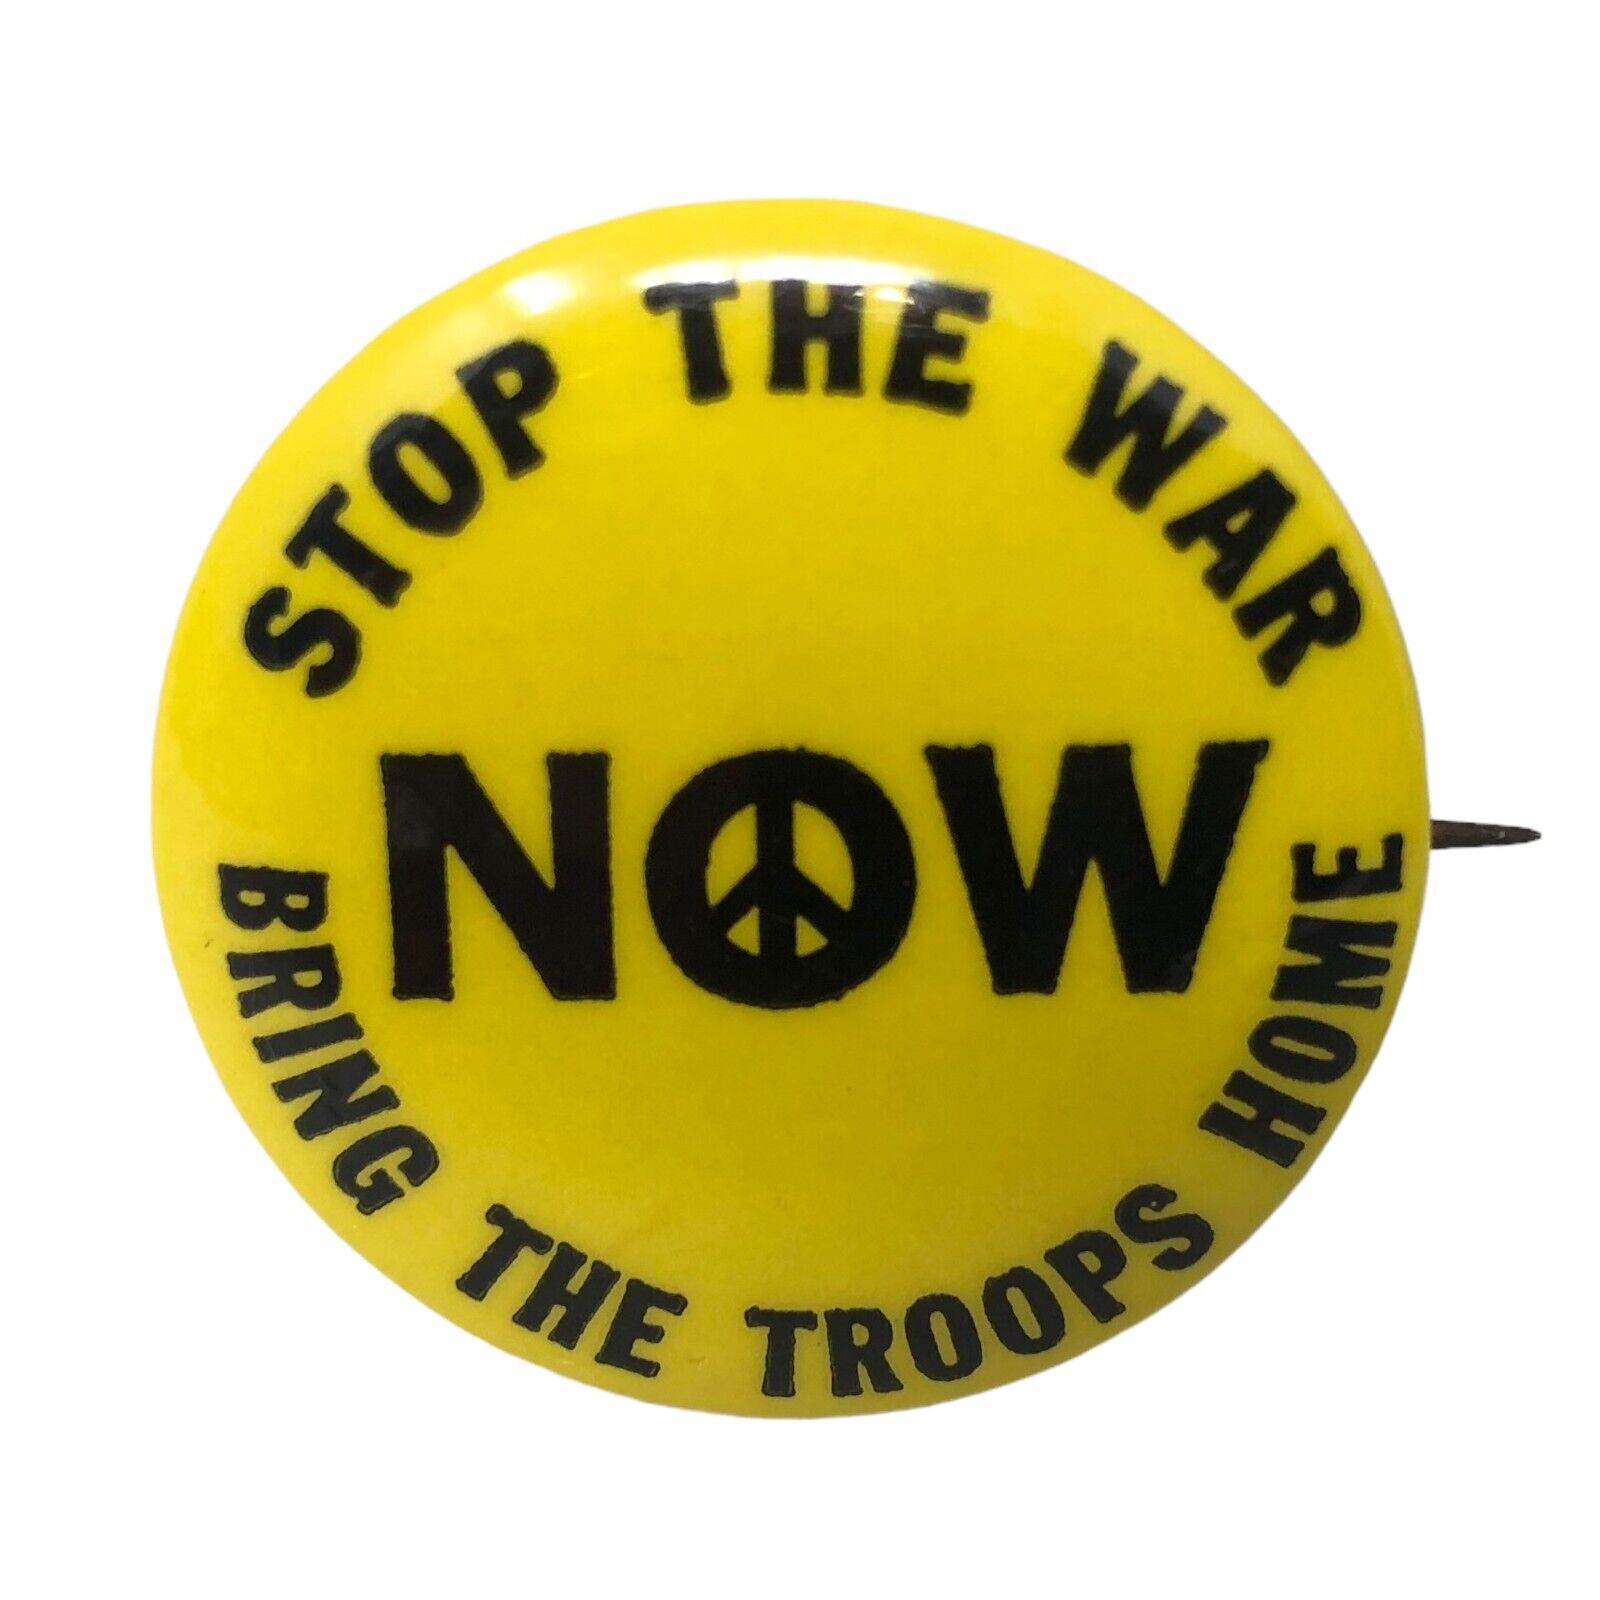 VTG Stop The War NOW Bring The Troops Home Vietnam War Yellow Pin Button Protest